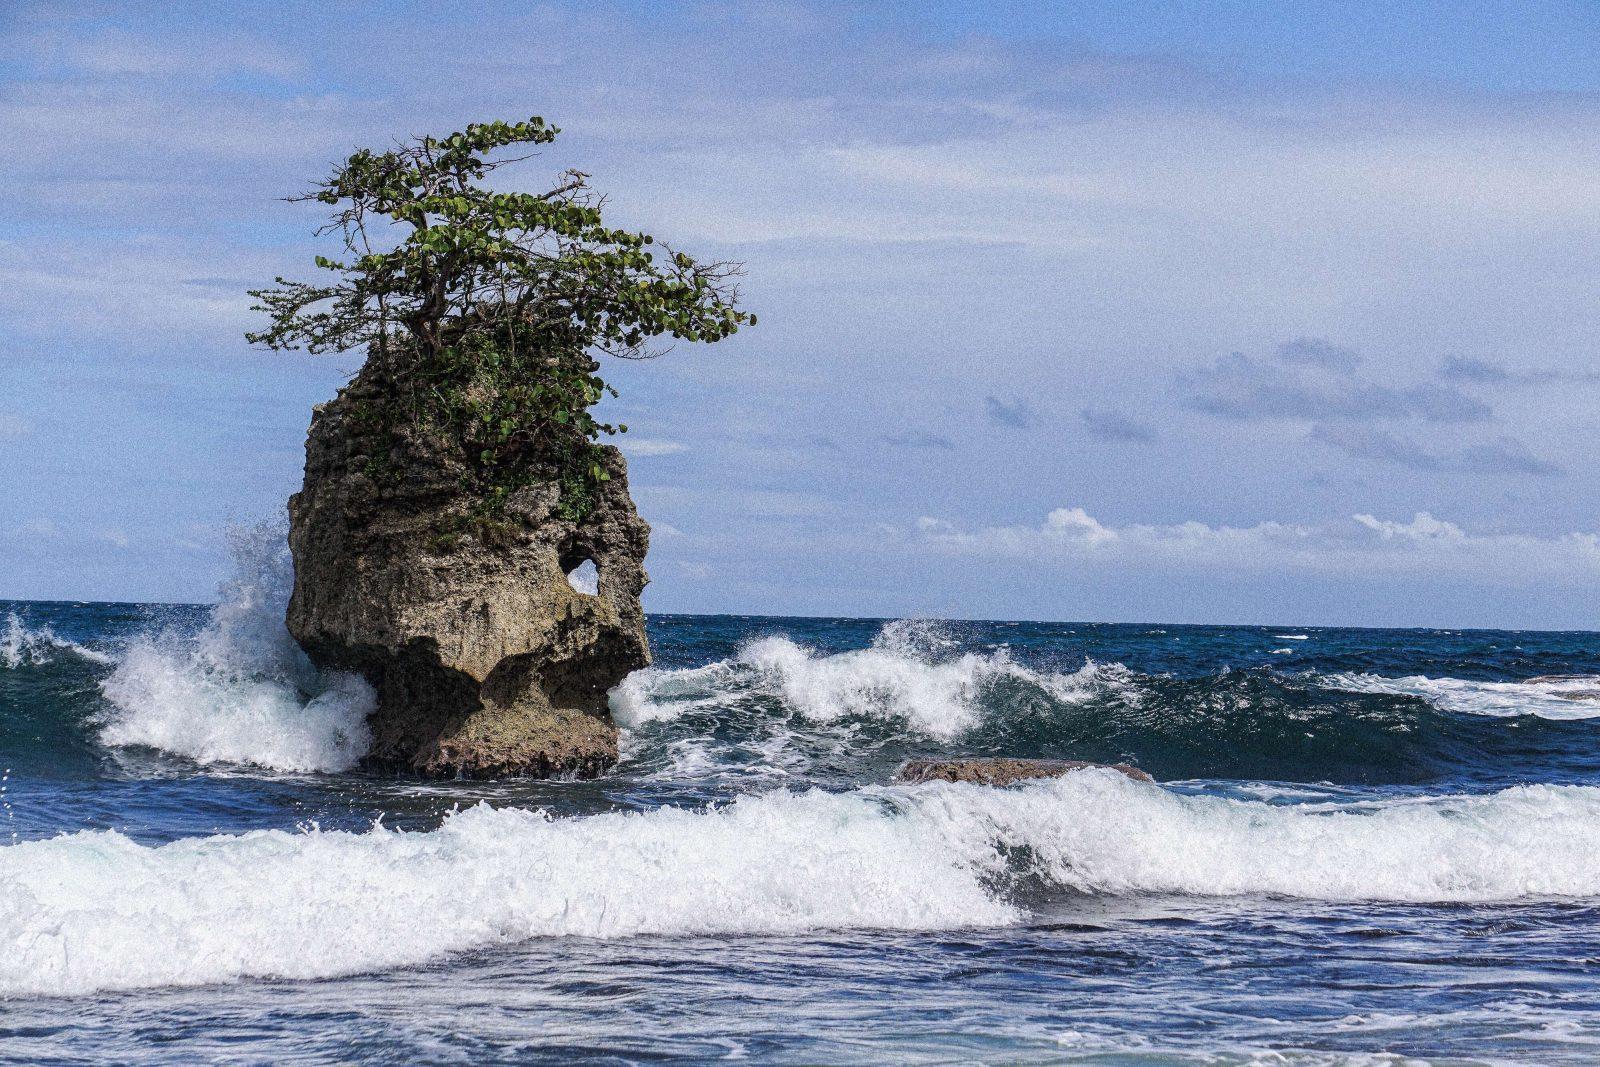 Welcome to Costa Rica: Big rock in ocean with a hole in it, tree on top, waves all around